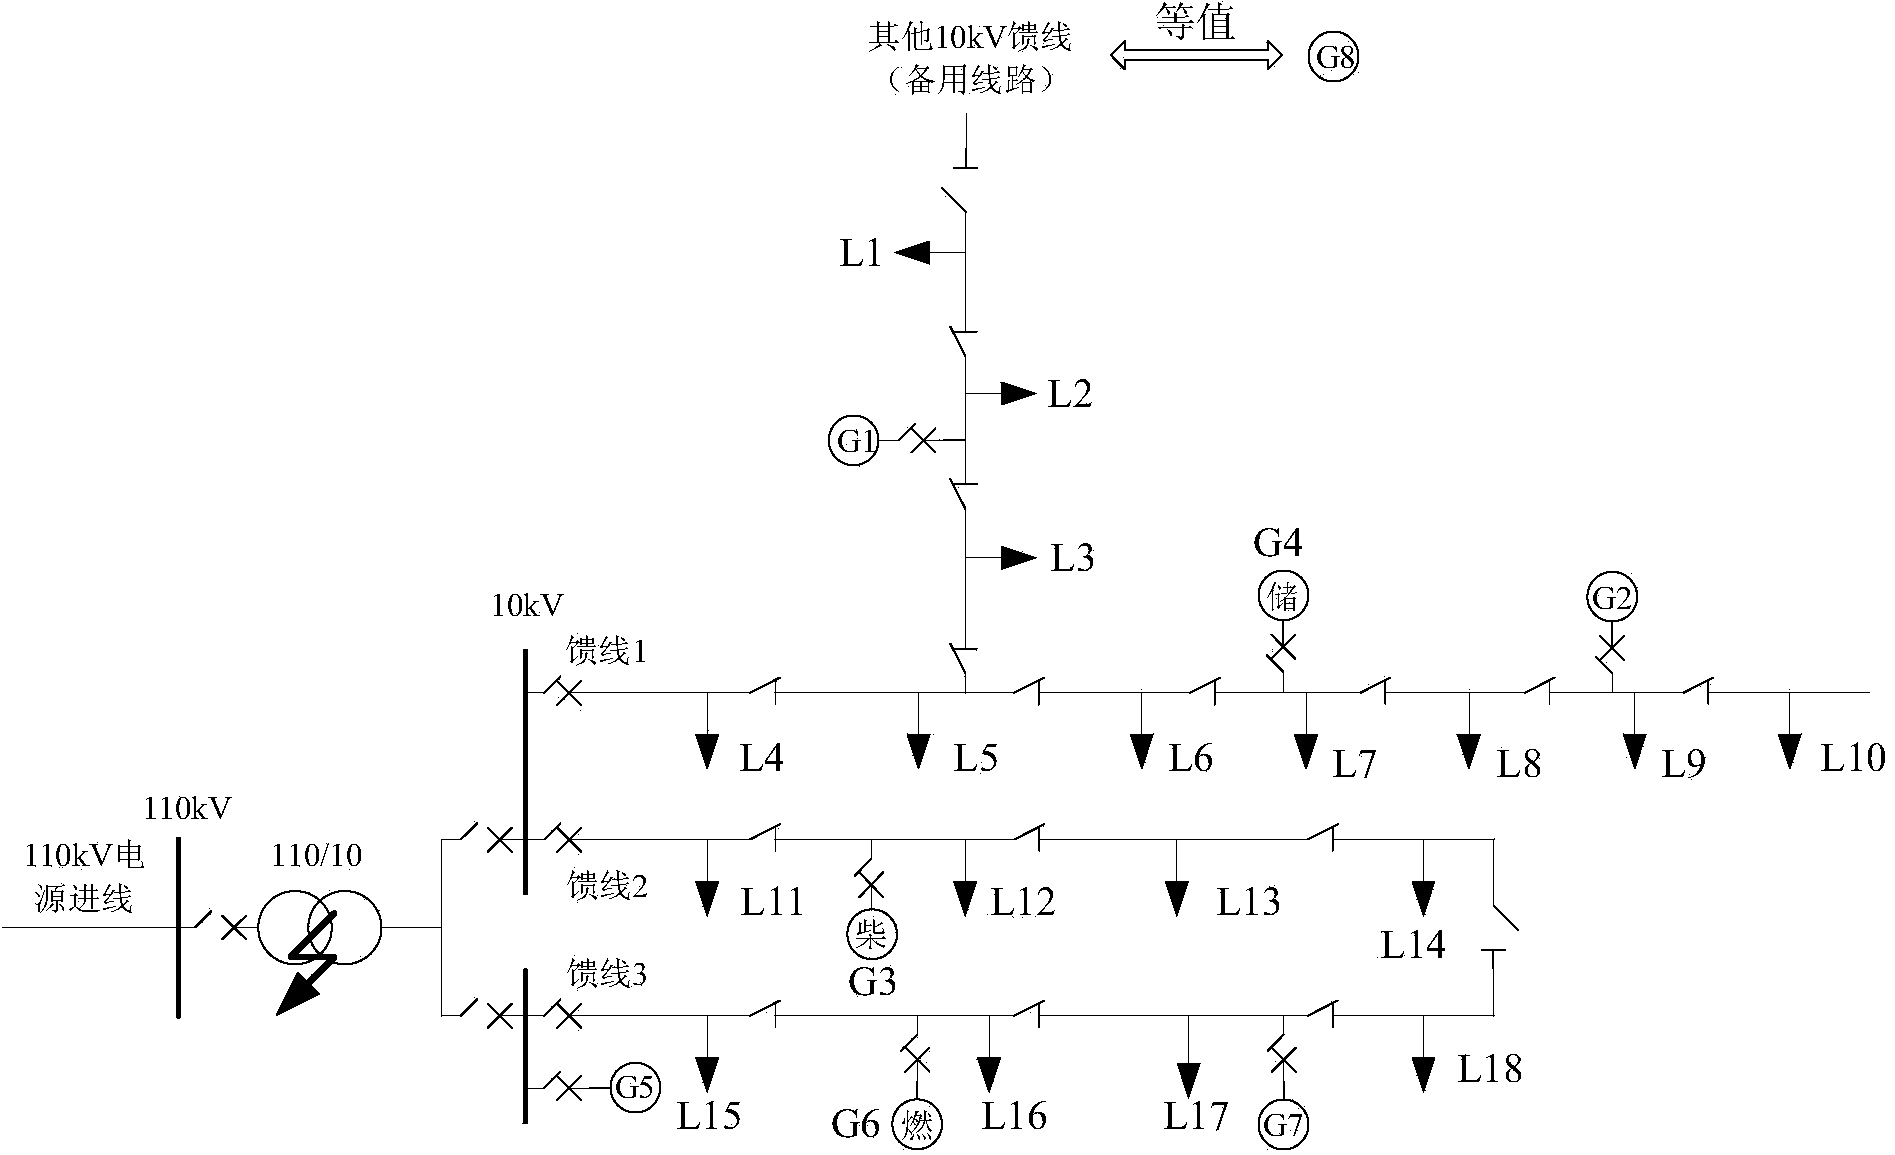 Method and system for restoring power after fault of power distribution network containing DGs (distributed generation)